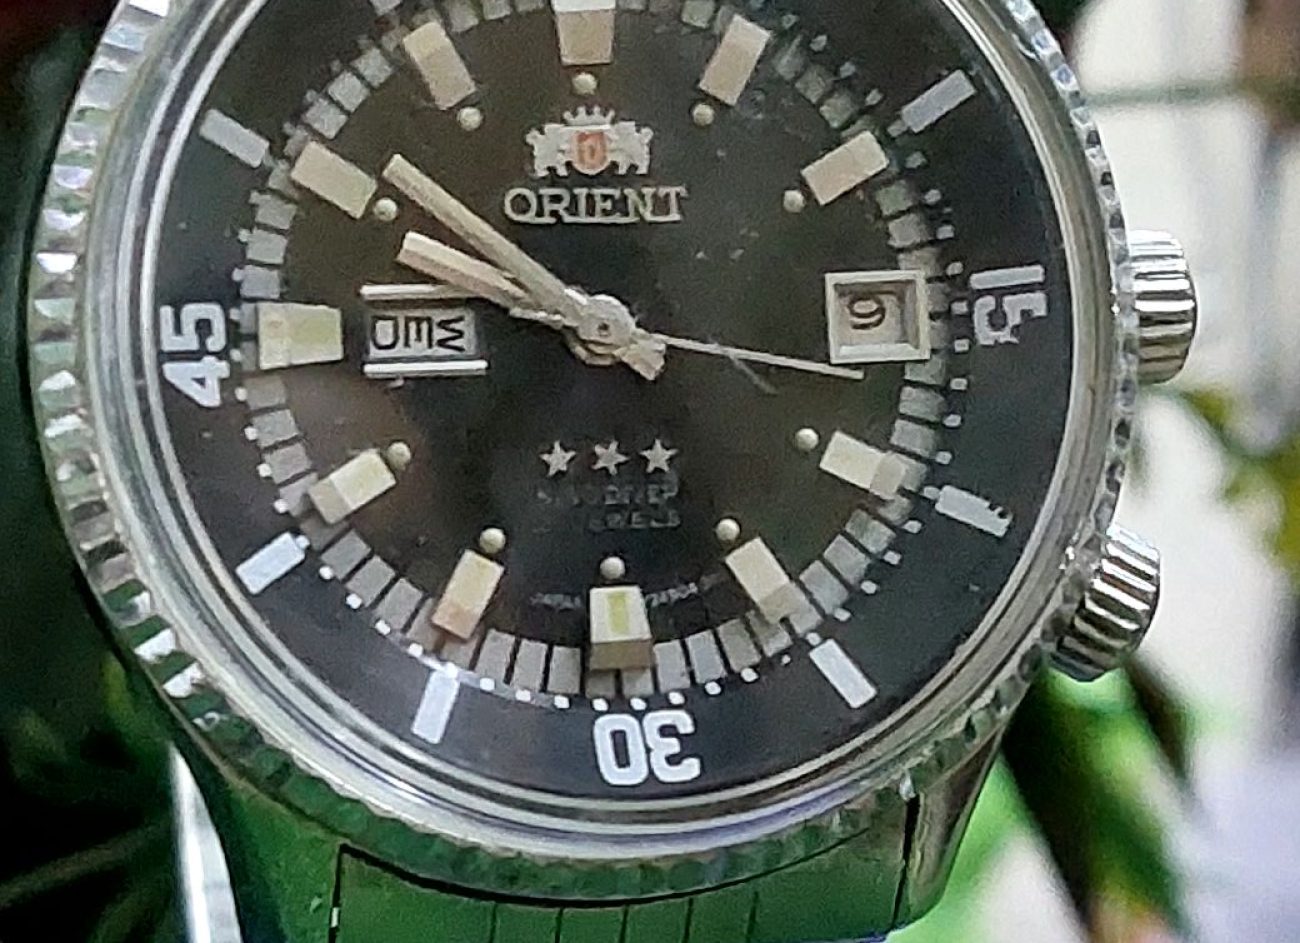 Vintage 1973 Orient King Diver Automatic Japan made Men's Watch in Mint condition